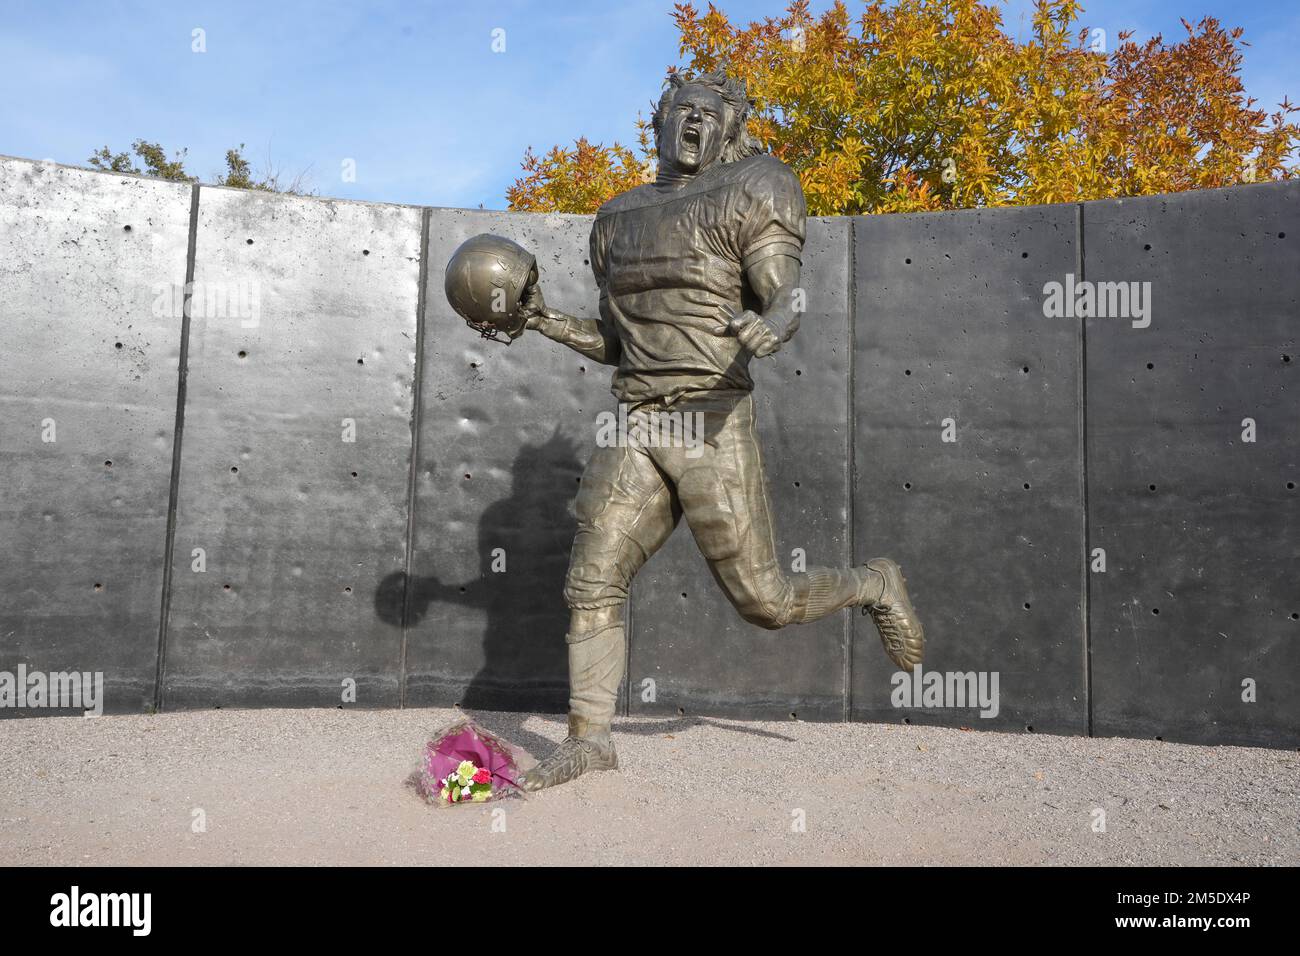 A memorial statue of Pat Tillman at State Farm Stadium reflection pond,  Monday, Dec. 26, 2022, in Glendale, Ariz. The stadium is the home of the  Arizona Cardinals. (Photo by Image of